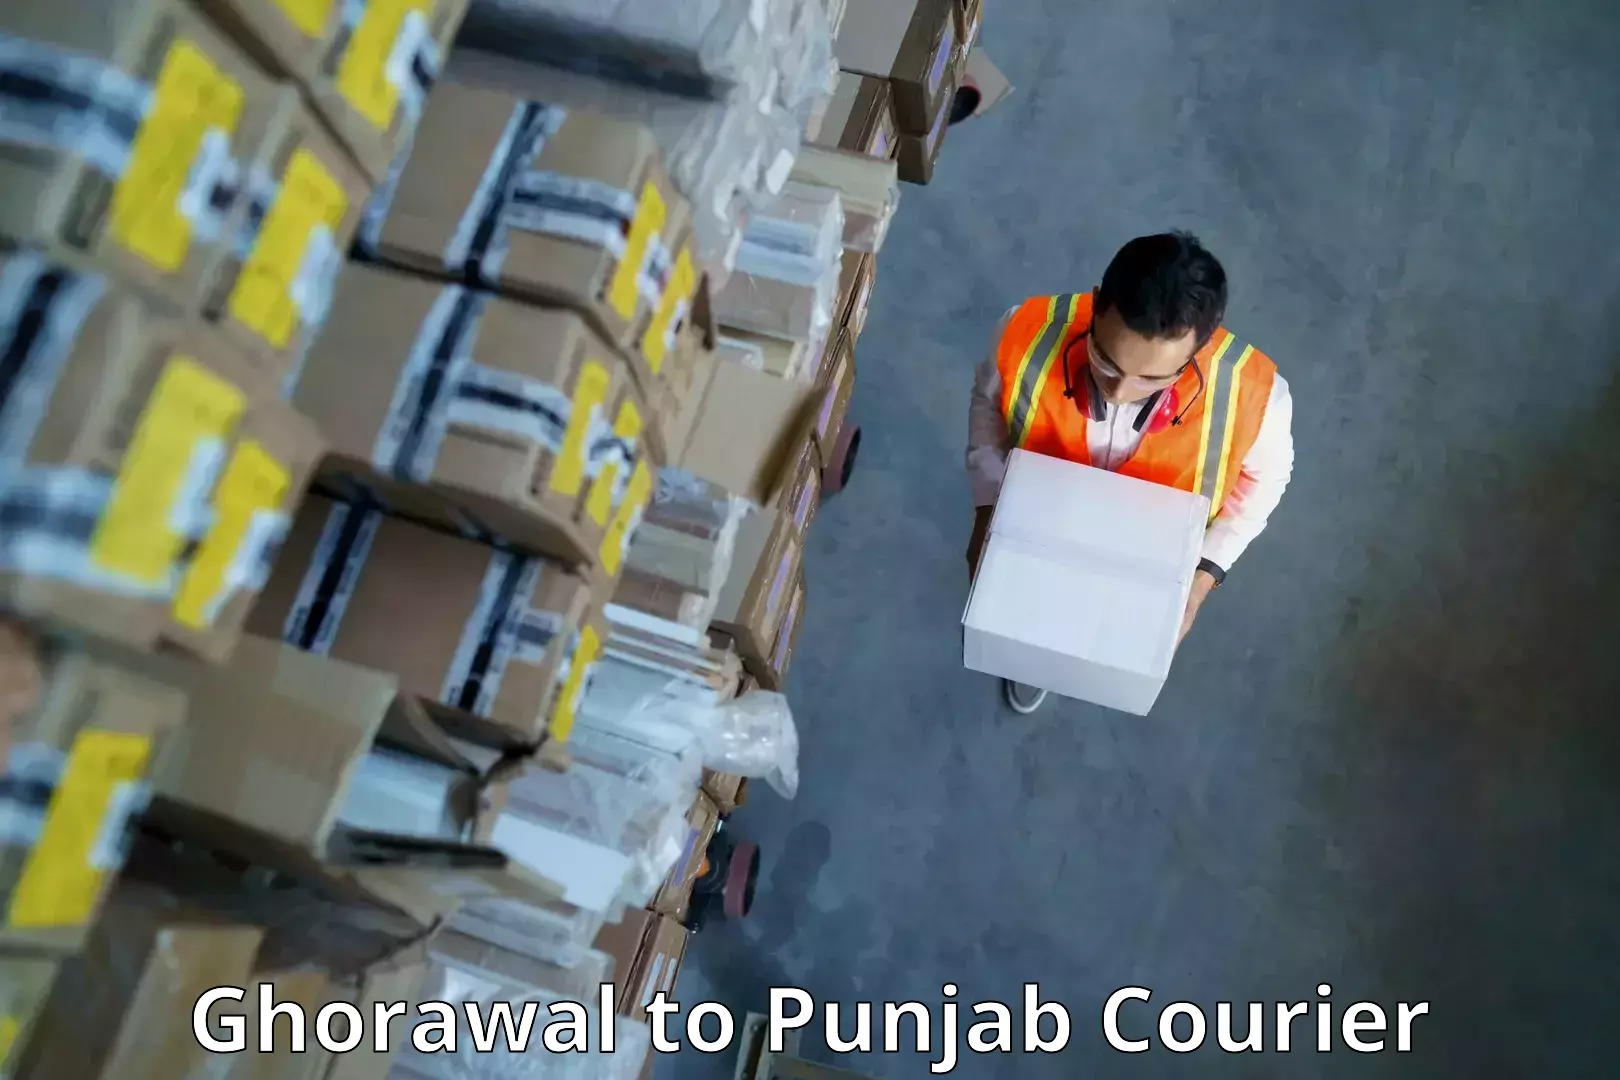 International courier networks Ghorawal to Fatehgarh Sahib